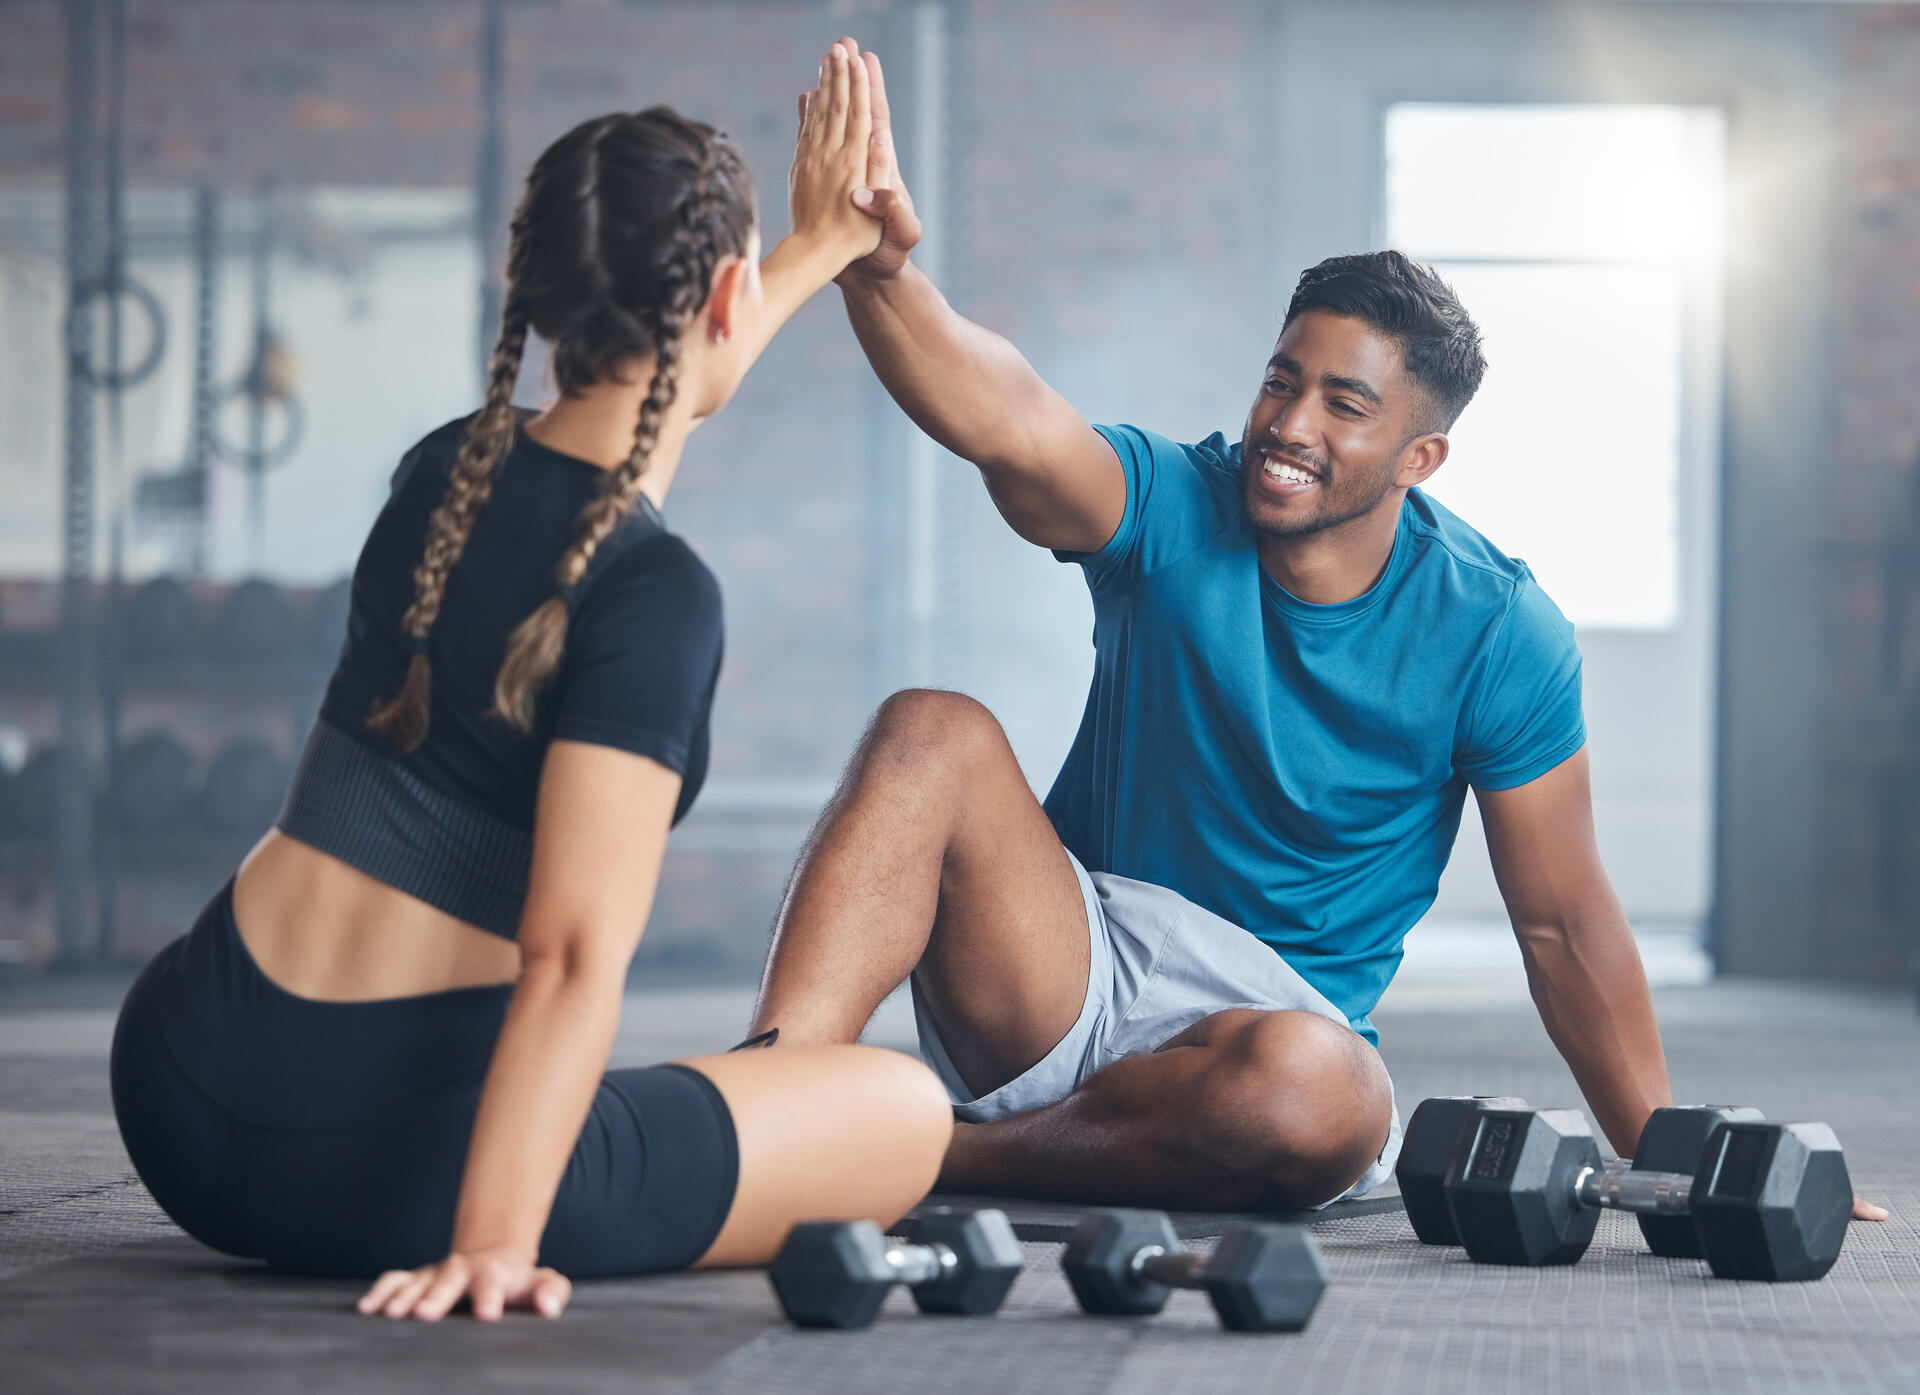 What are the Top 10 Benefits of Hiring a Personal Trainer?